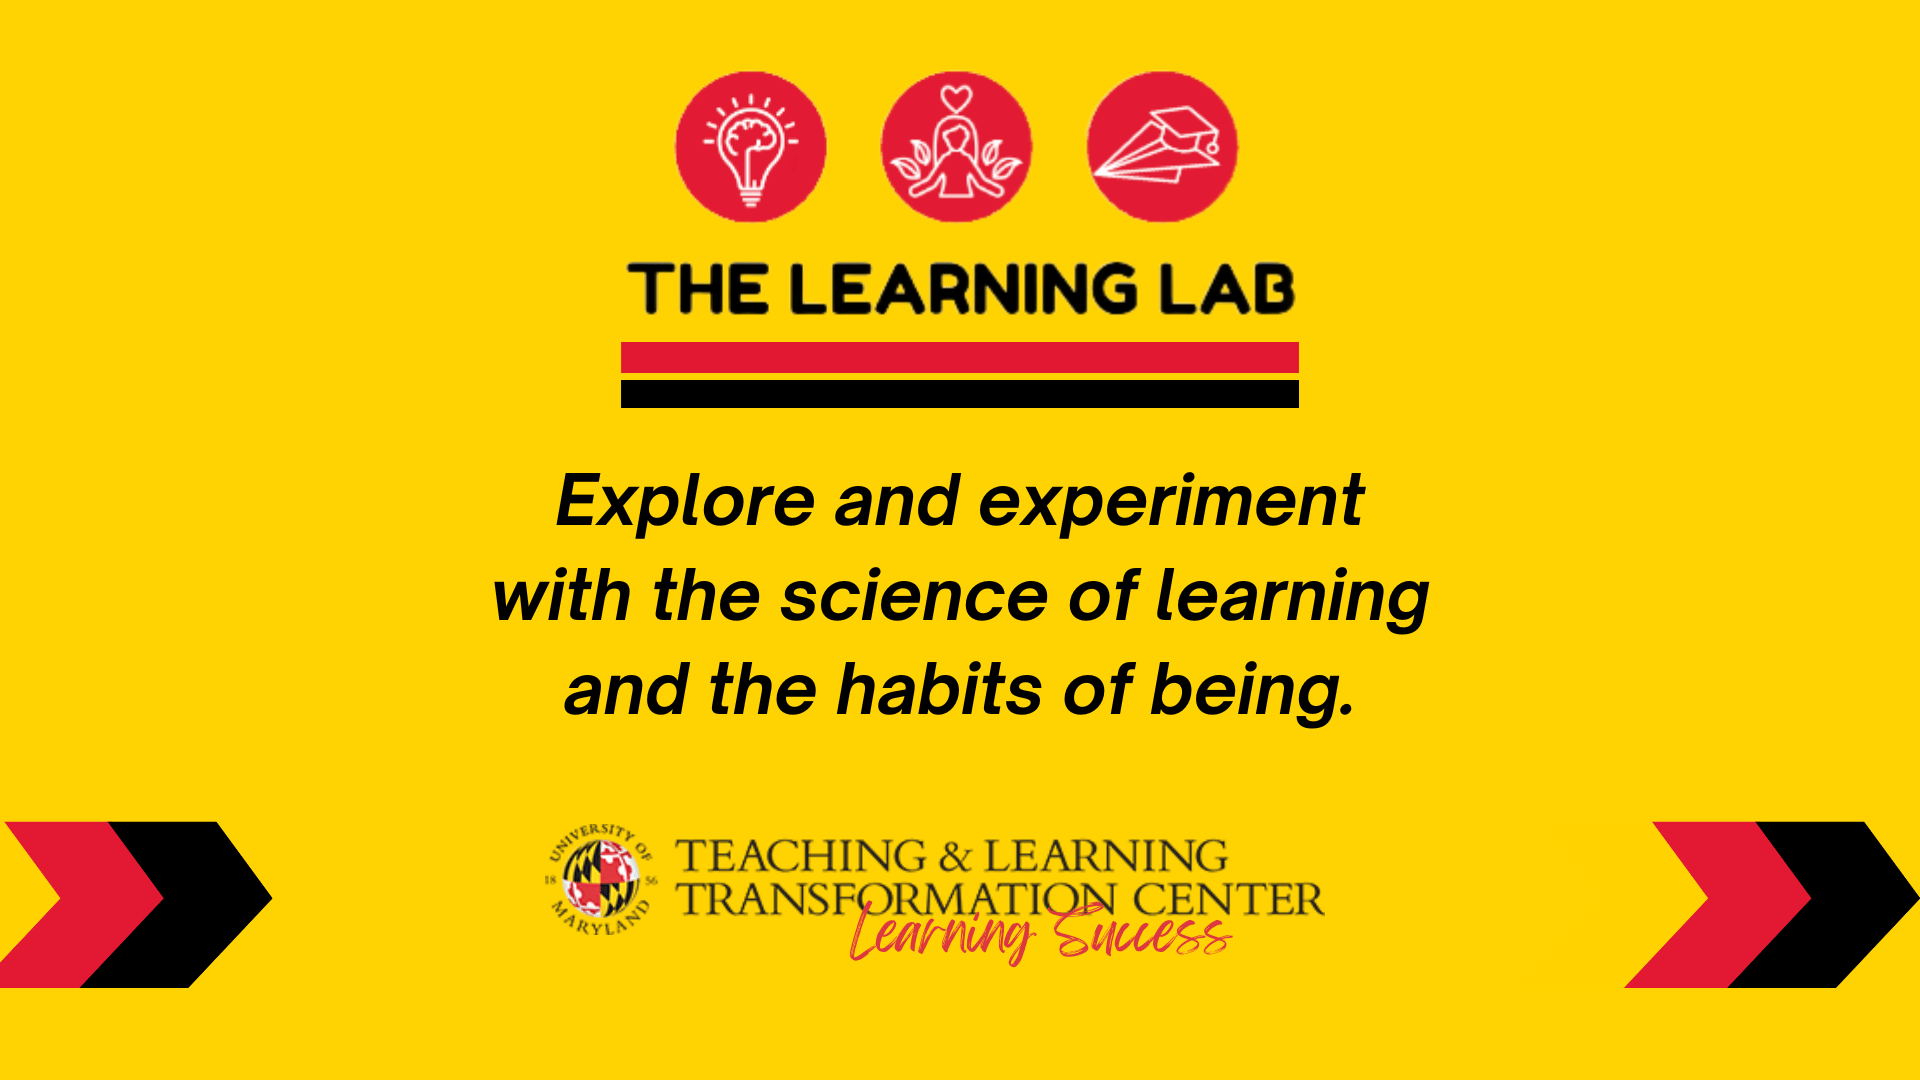 The Learning Lab: Explore and experiment with the science of learning and the habits of being.